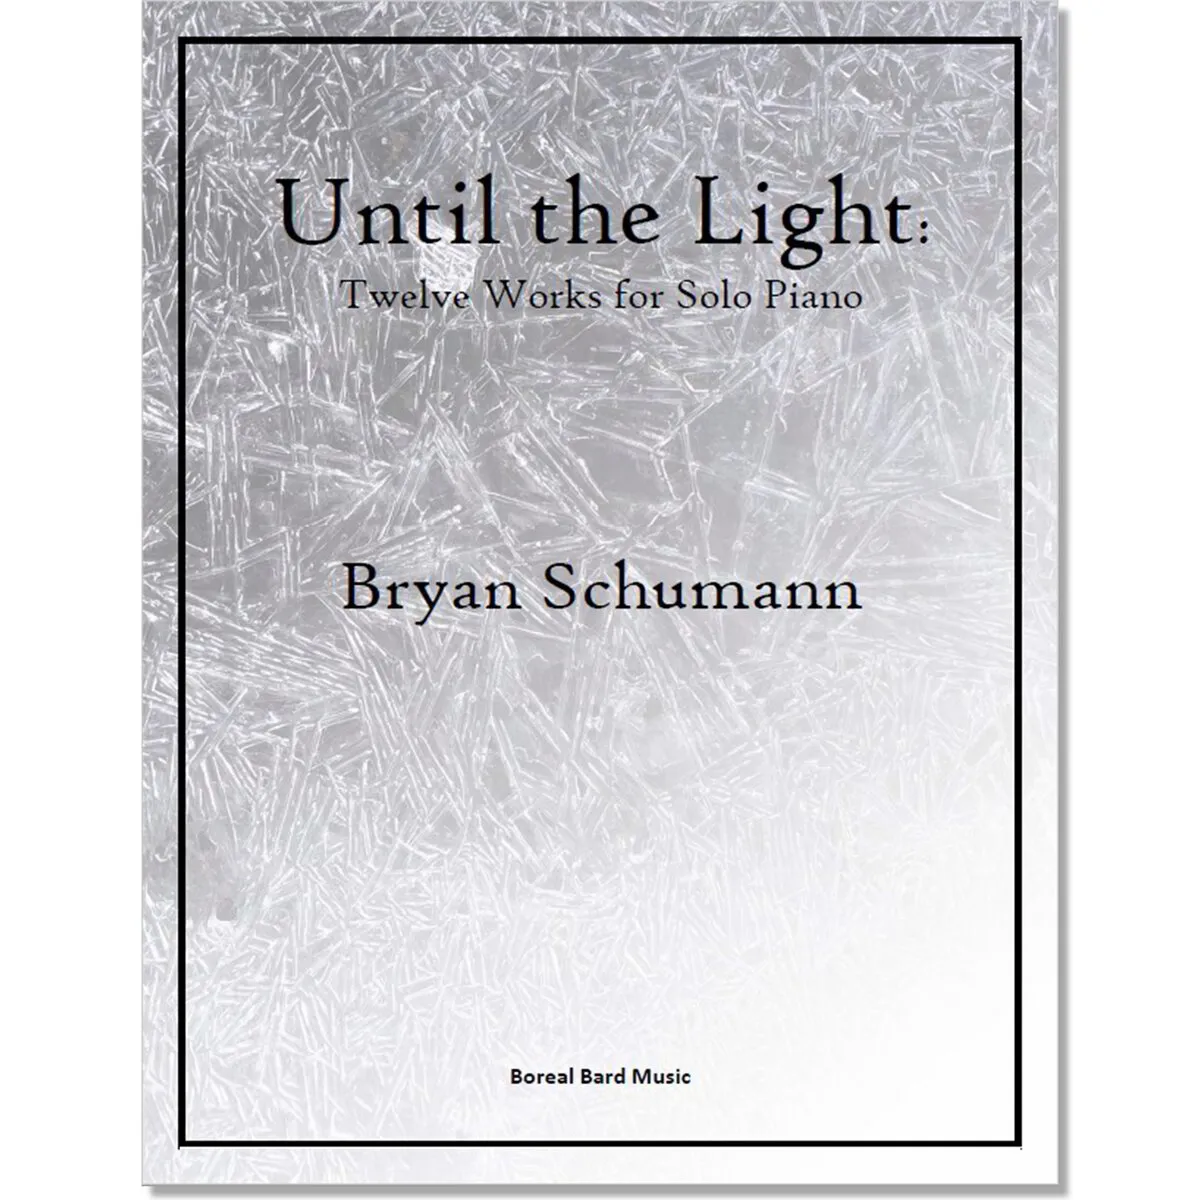 Until the Light: Twelve Works for Solo Piano (sheet music)